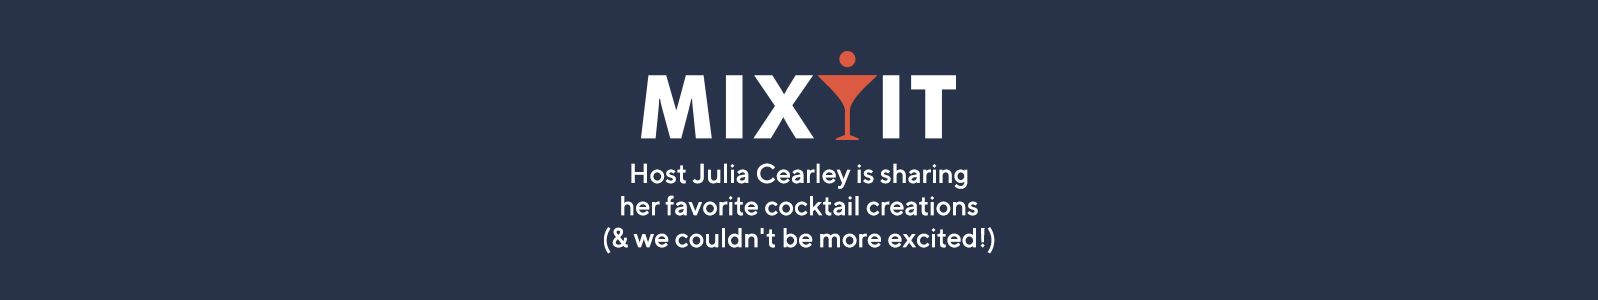 Mix It   Host Julia Cearley is sharing her favorite cocktail creations (& we couldn't be more excited!)